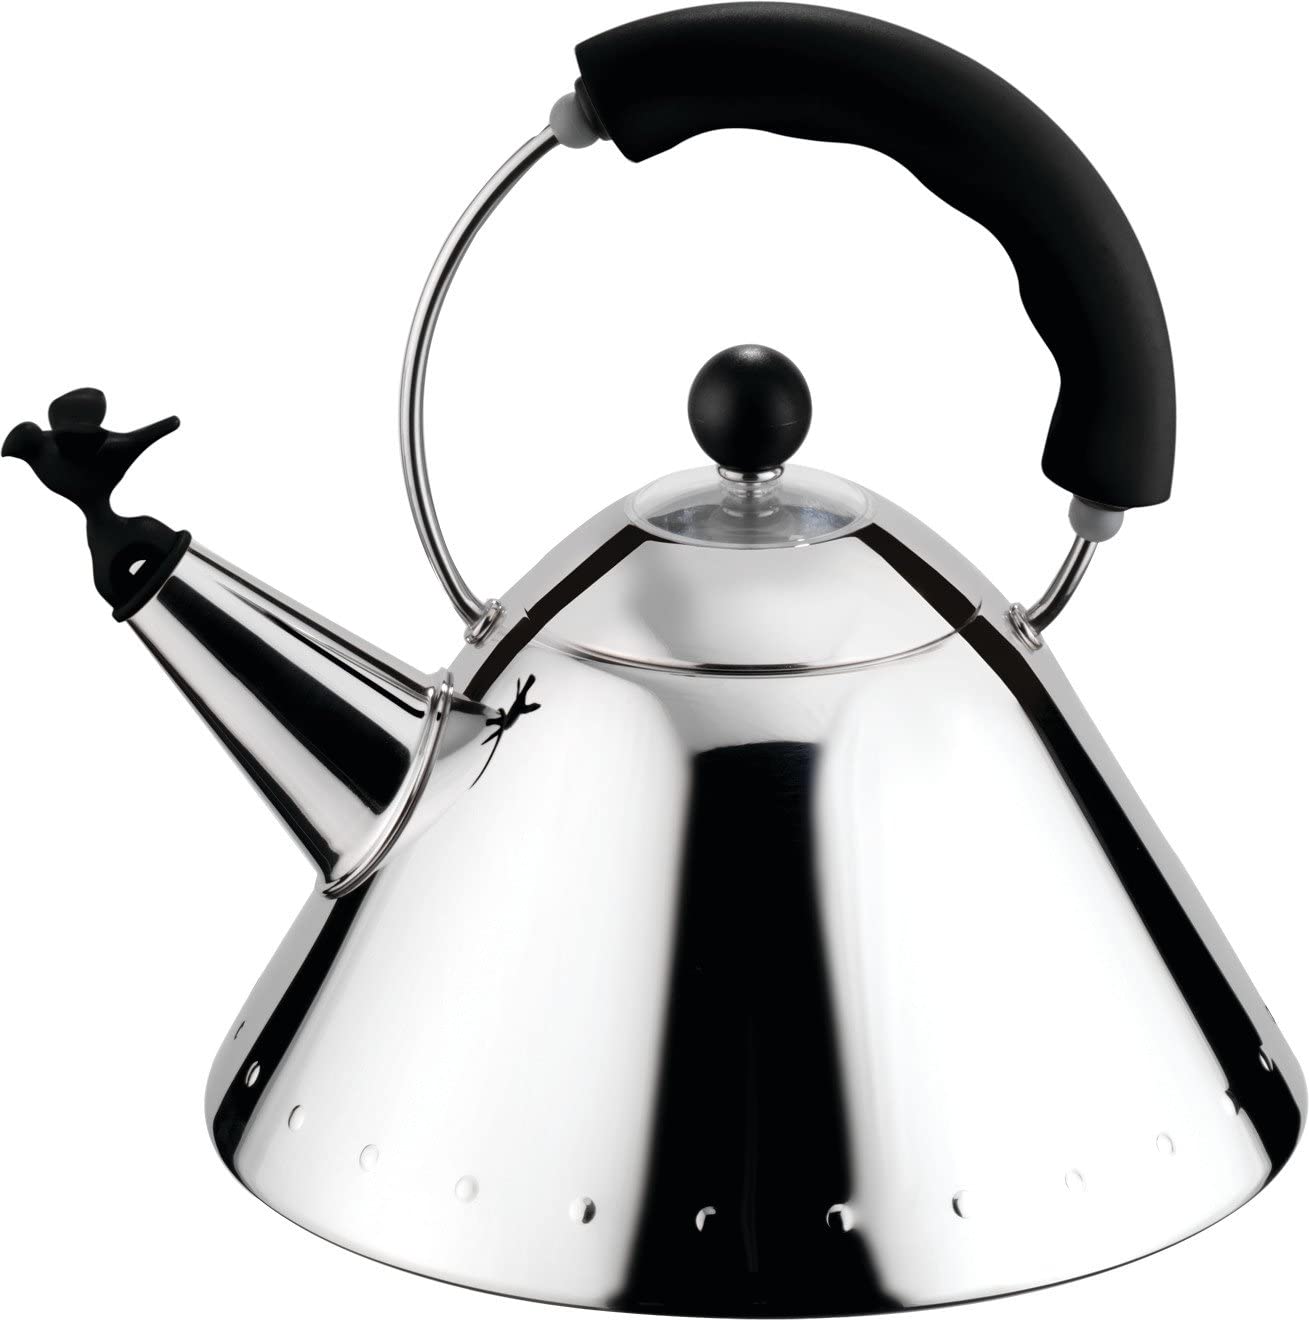 Alessi 9093 B Kettle Stainless Steel with Handle and Bird-Shaped Whistle Polyamide Black